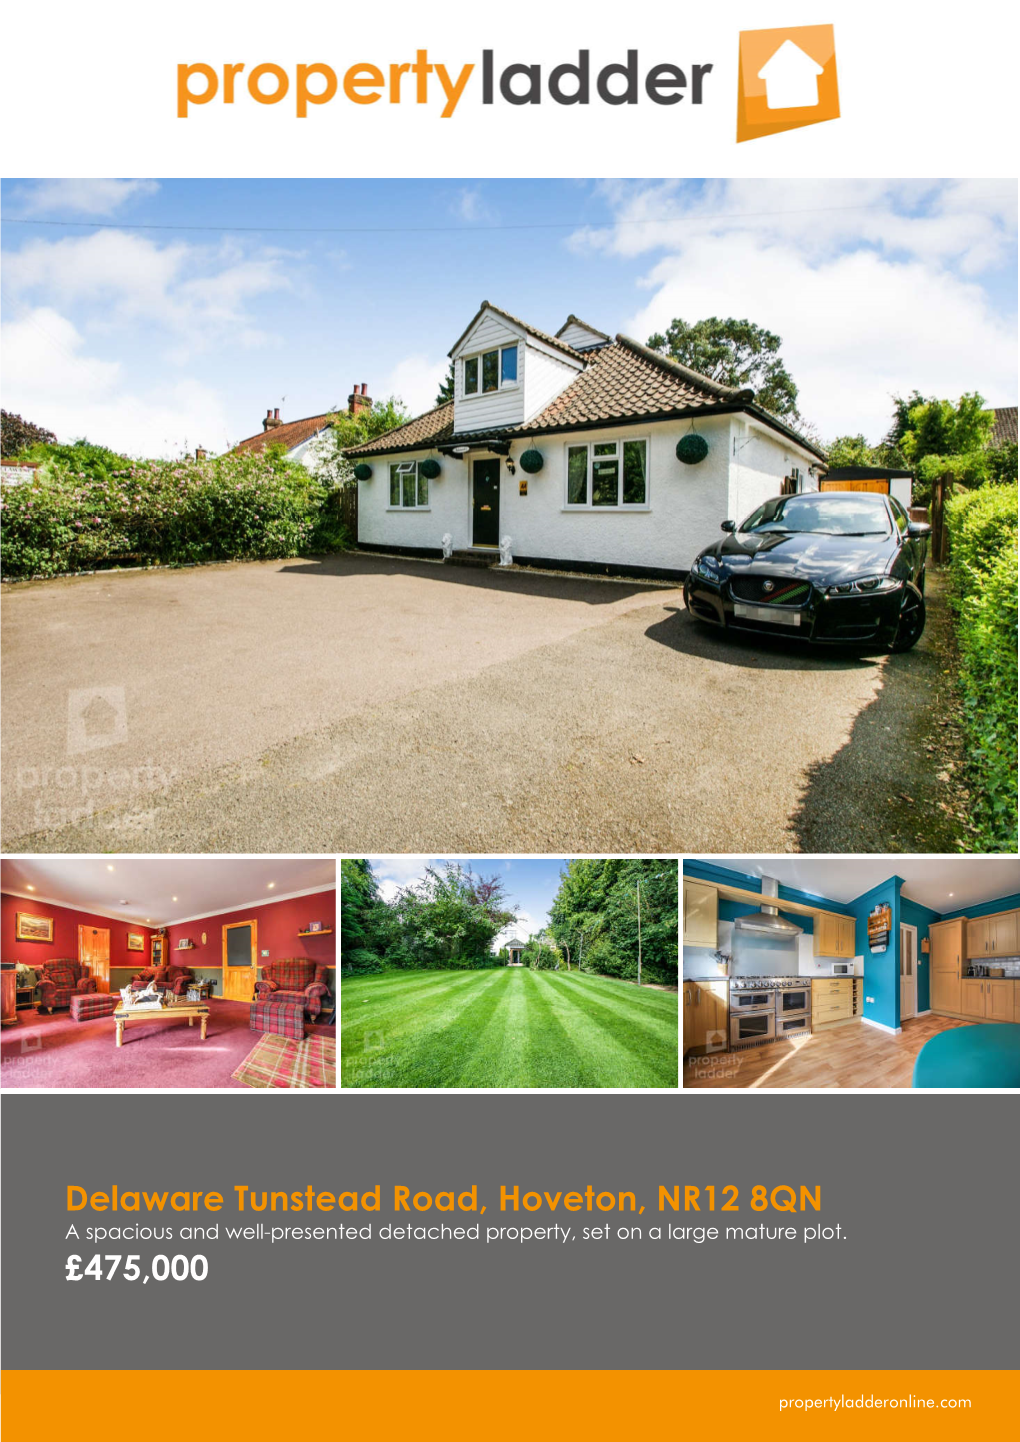 Delaware Tunstead Road, Hoveton, NR12 8QN a Spacious and Well-Presented Detached Property, Set on a Large Mature Plot